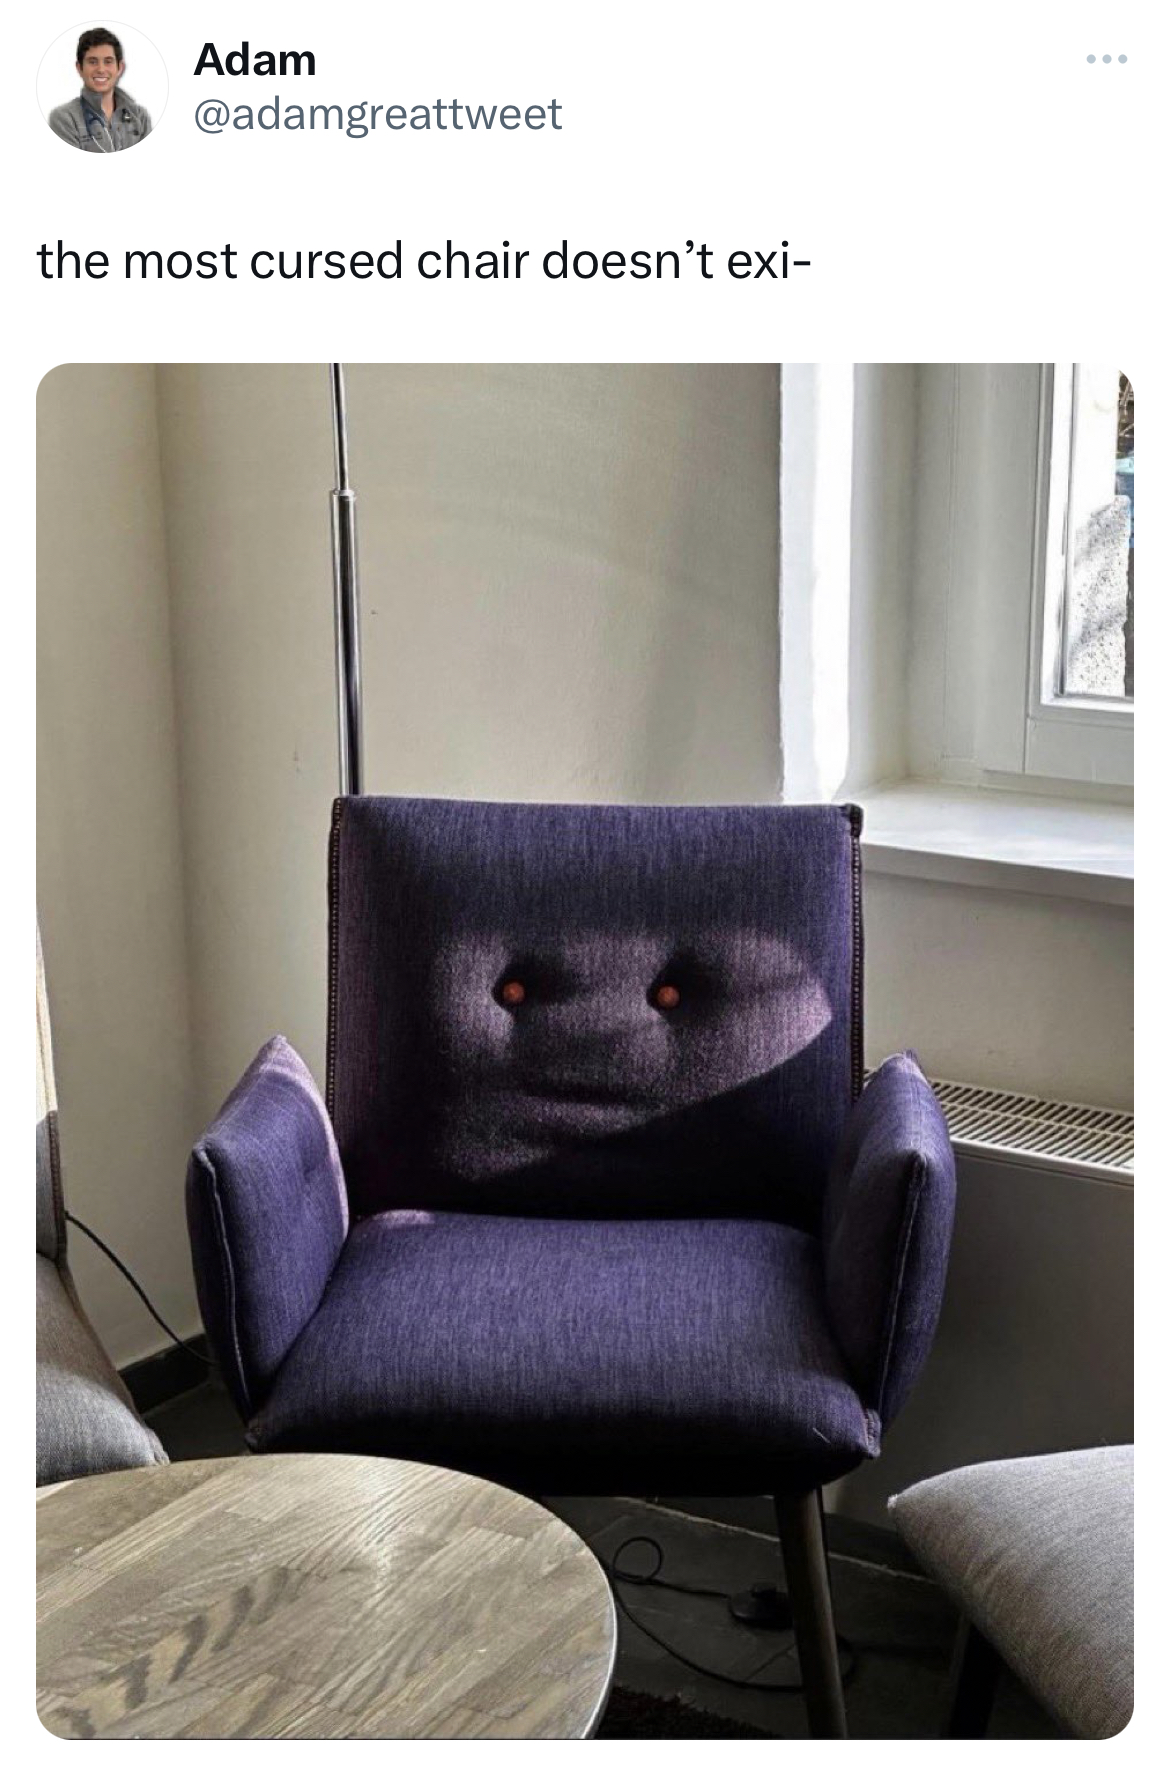 savage and absurd tweets - chair - Adam the most cursed chair doesn't exi